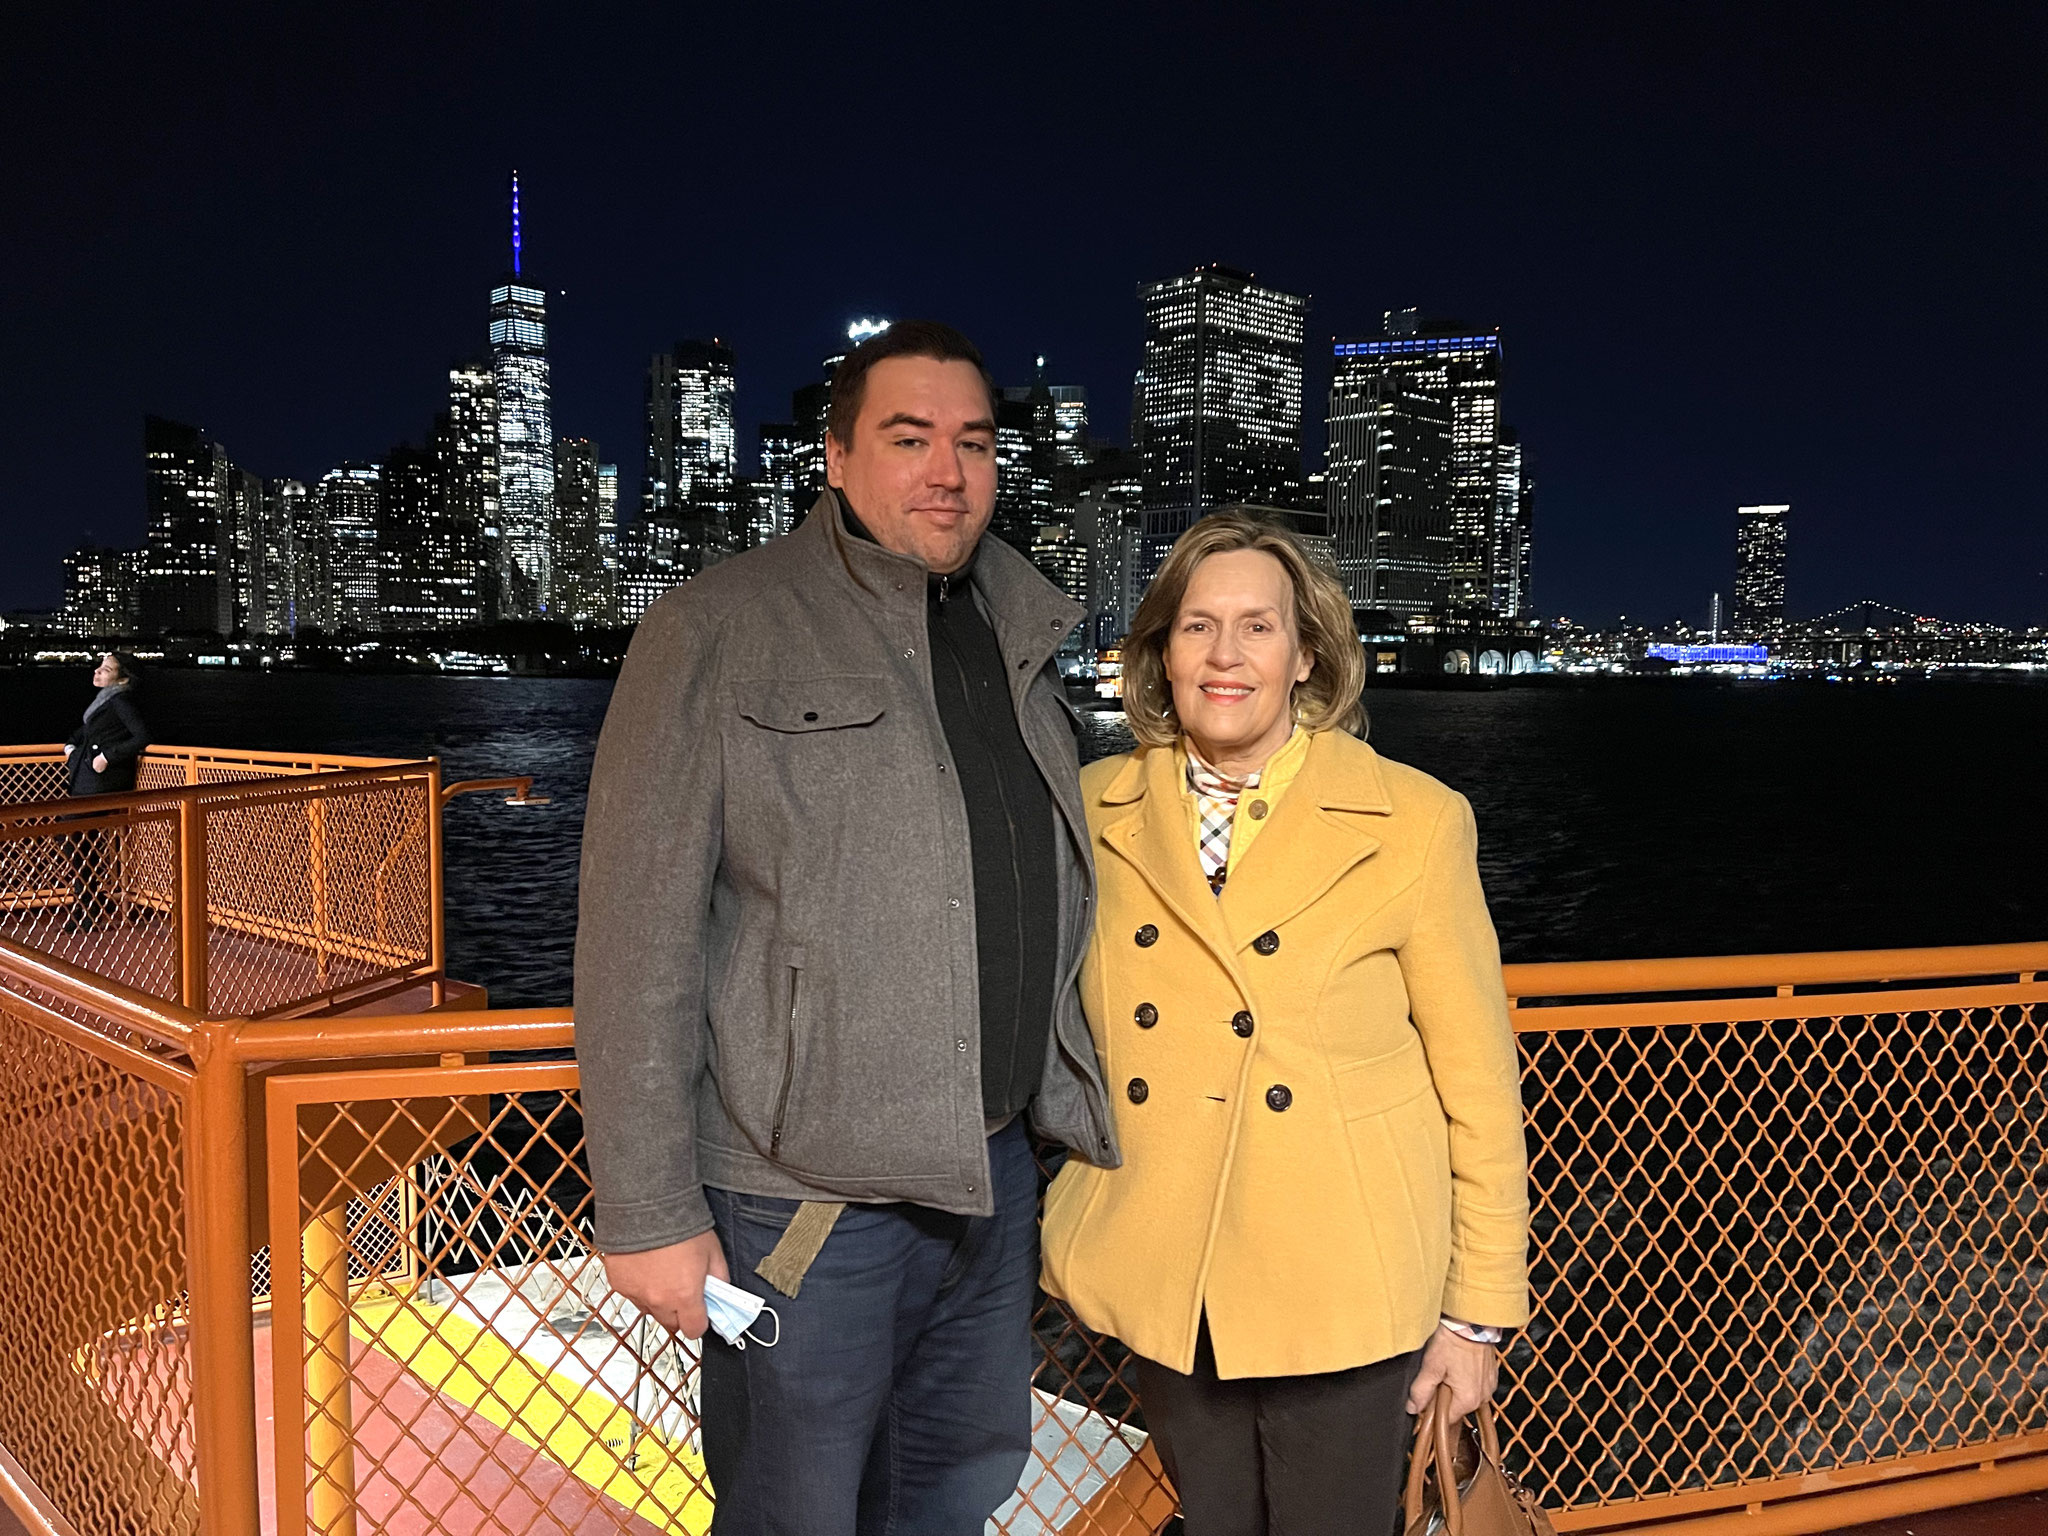 Greg & Lorraine on the Staten Is. ferry going to a doo-wop Xmas concert 12-3-2021